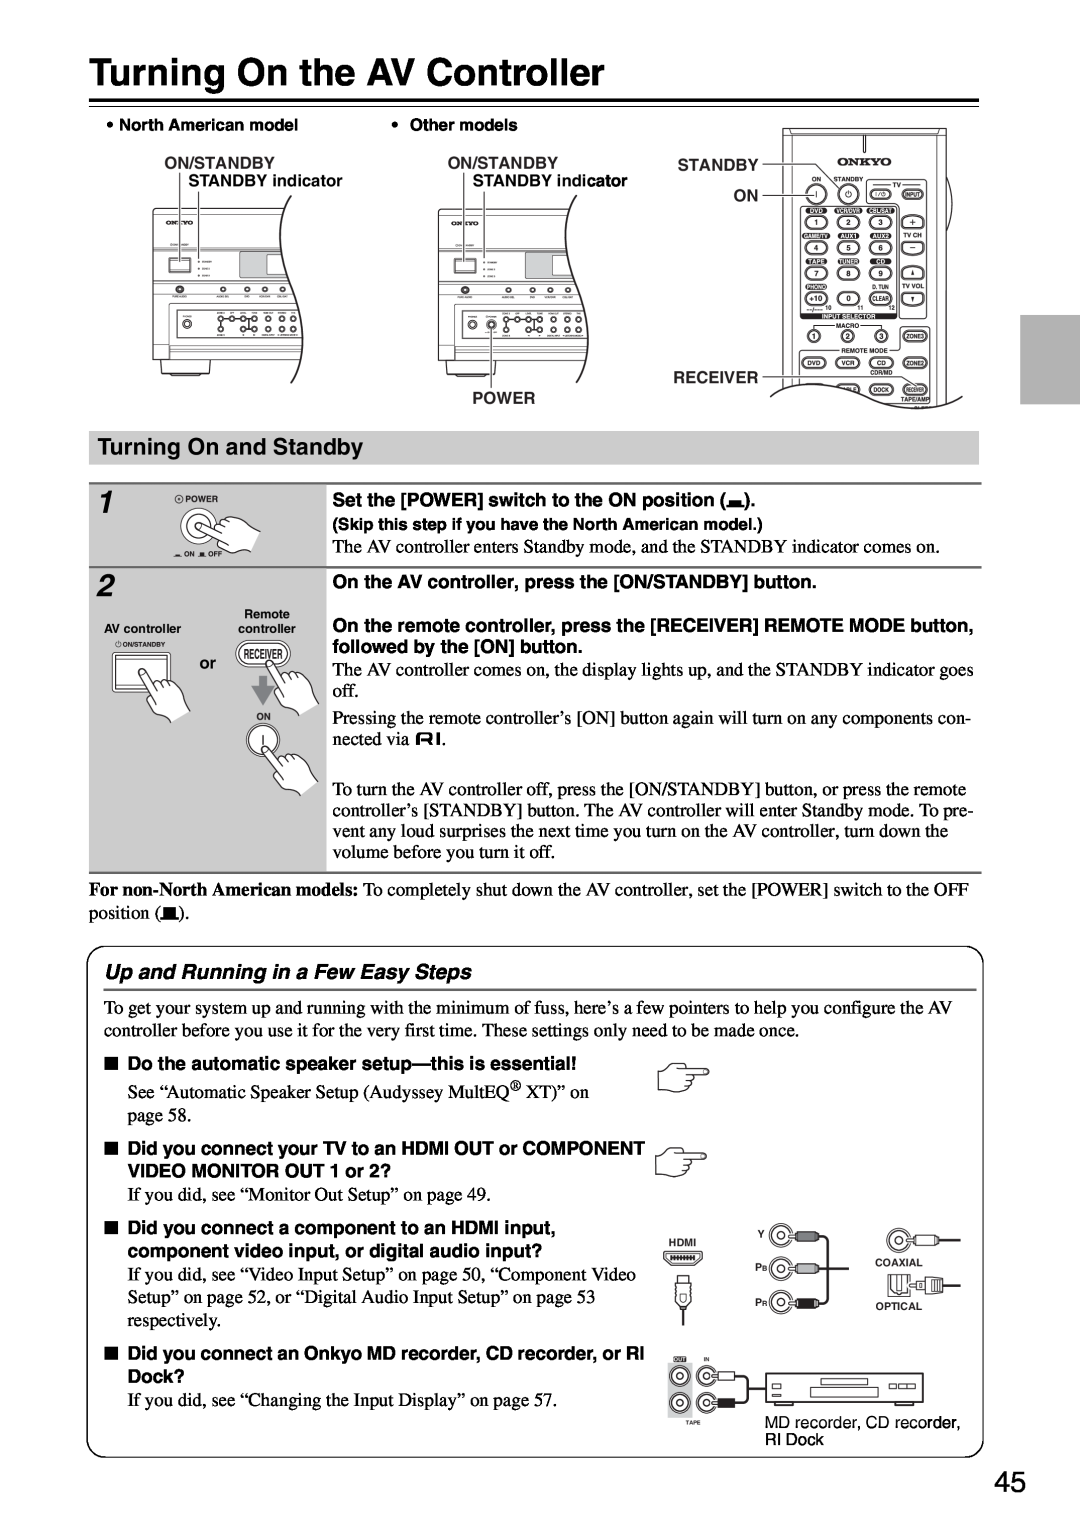 Onkyo PR-SC886 instruction manual Turning On the AV Controller, Turning On and Standby, Up and Running in a Few Easy Steps 